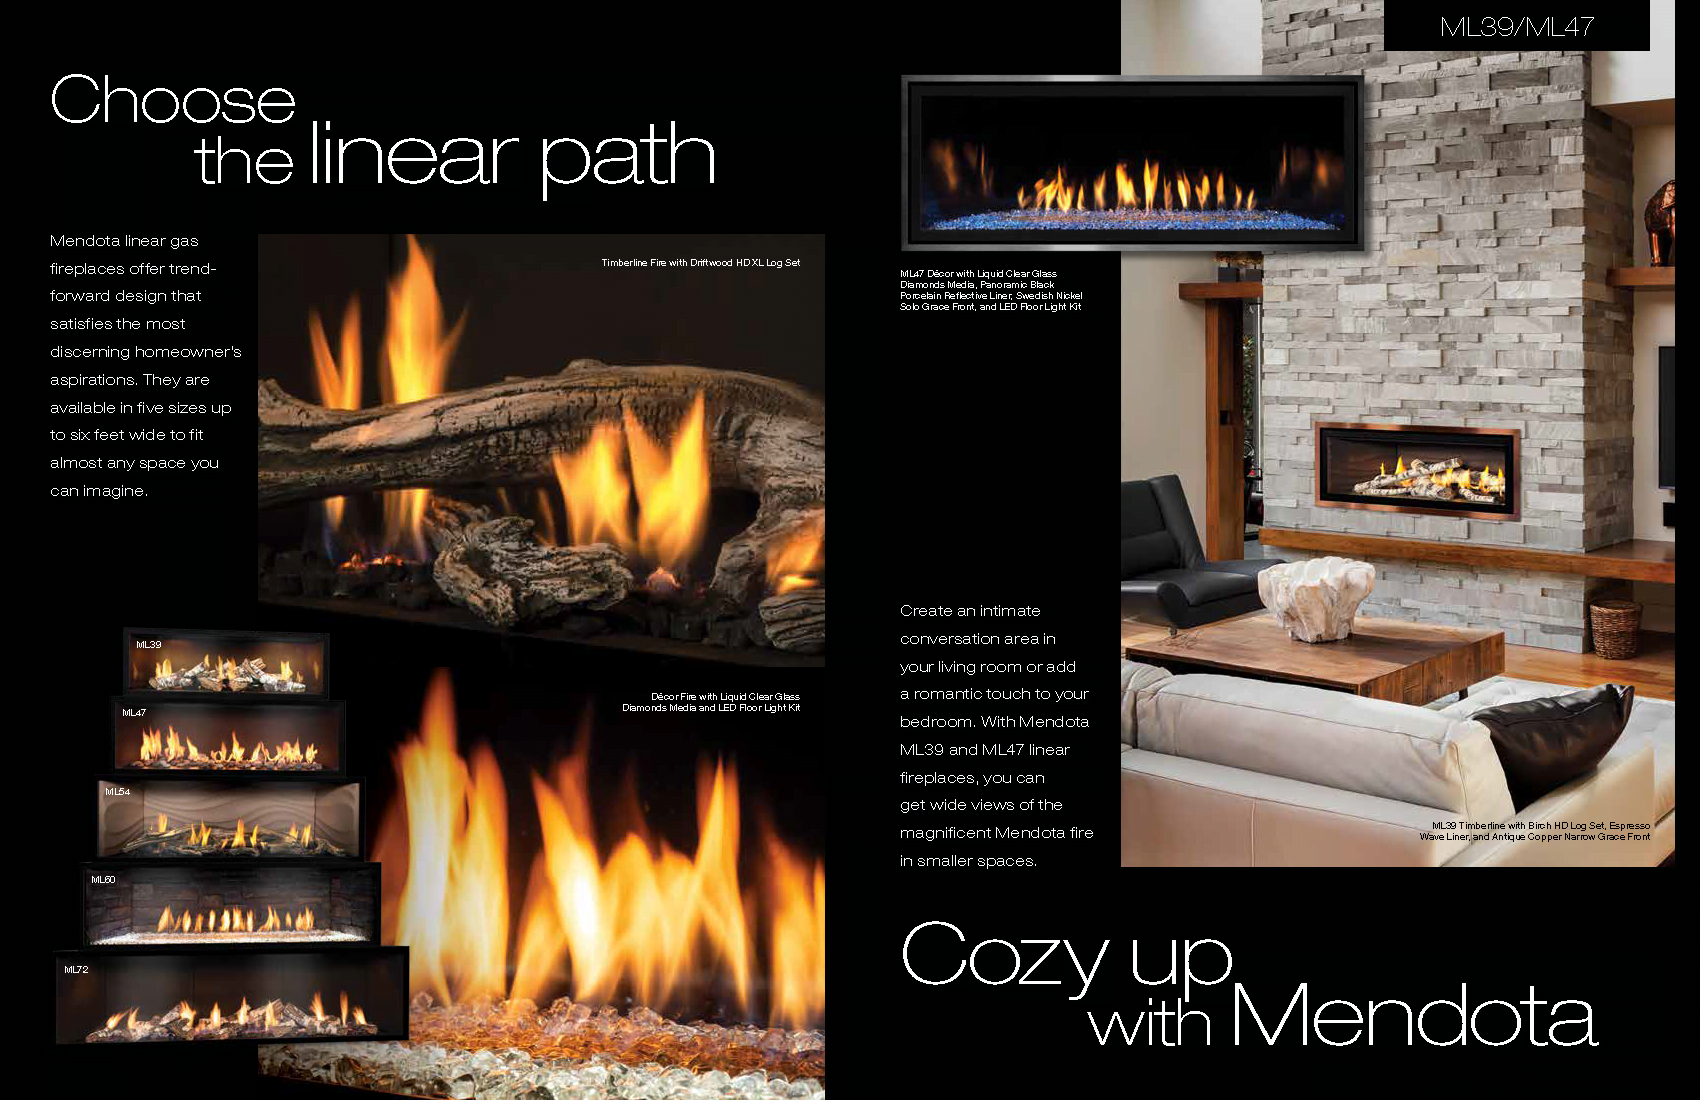 Mendota Linear Gas Fireplaces For Discerning Homeowners 5